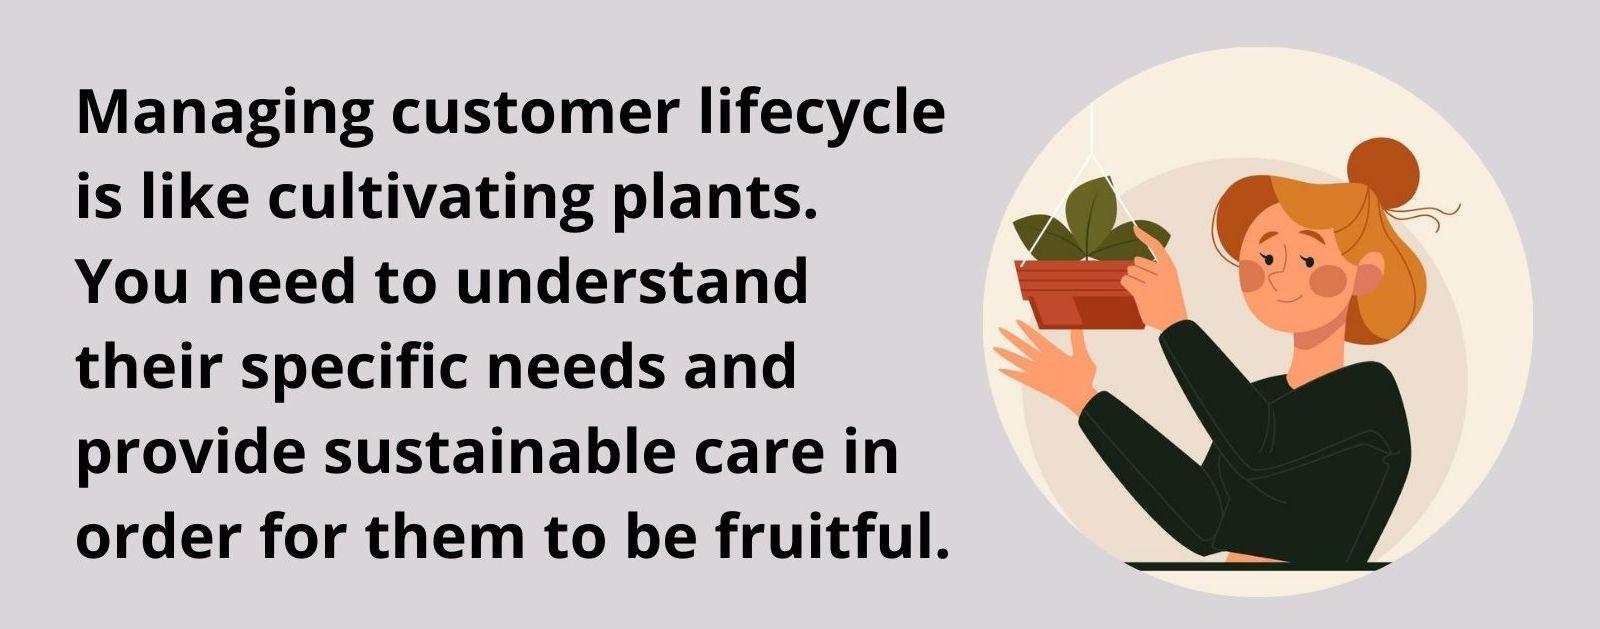 Managing customer lifecycle is like cultivating plants.